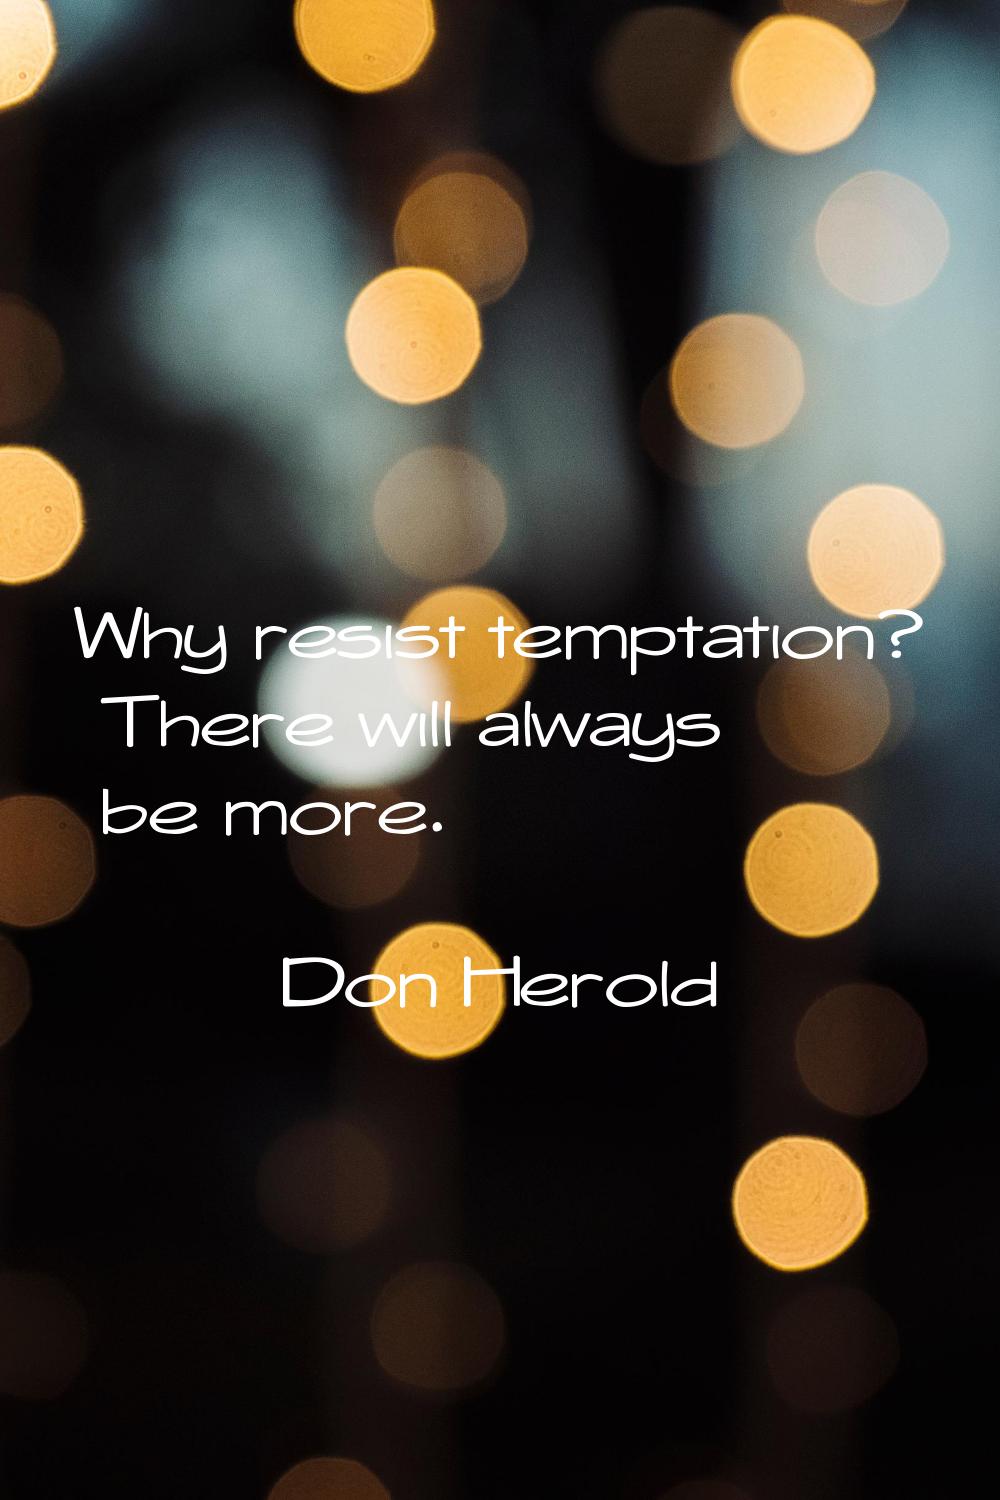 Why resist temptation? There will always be more.